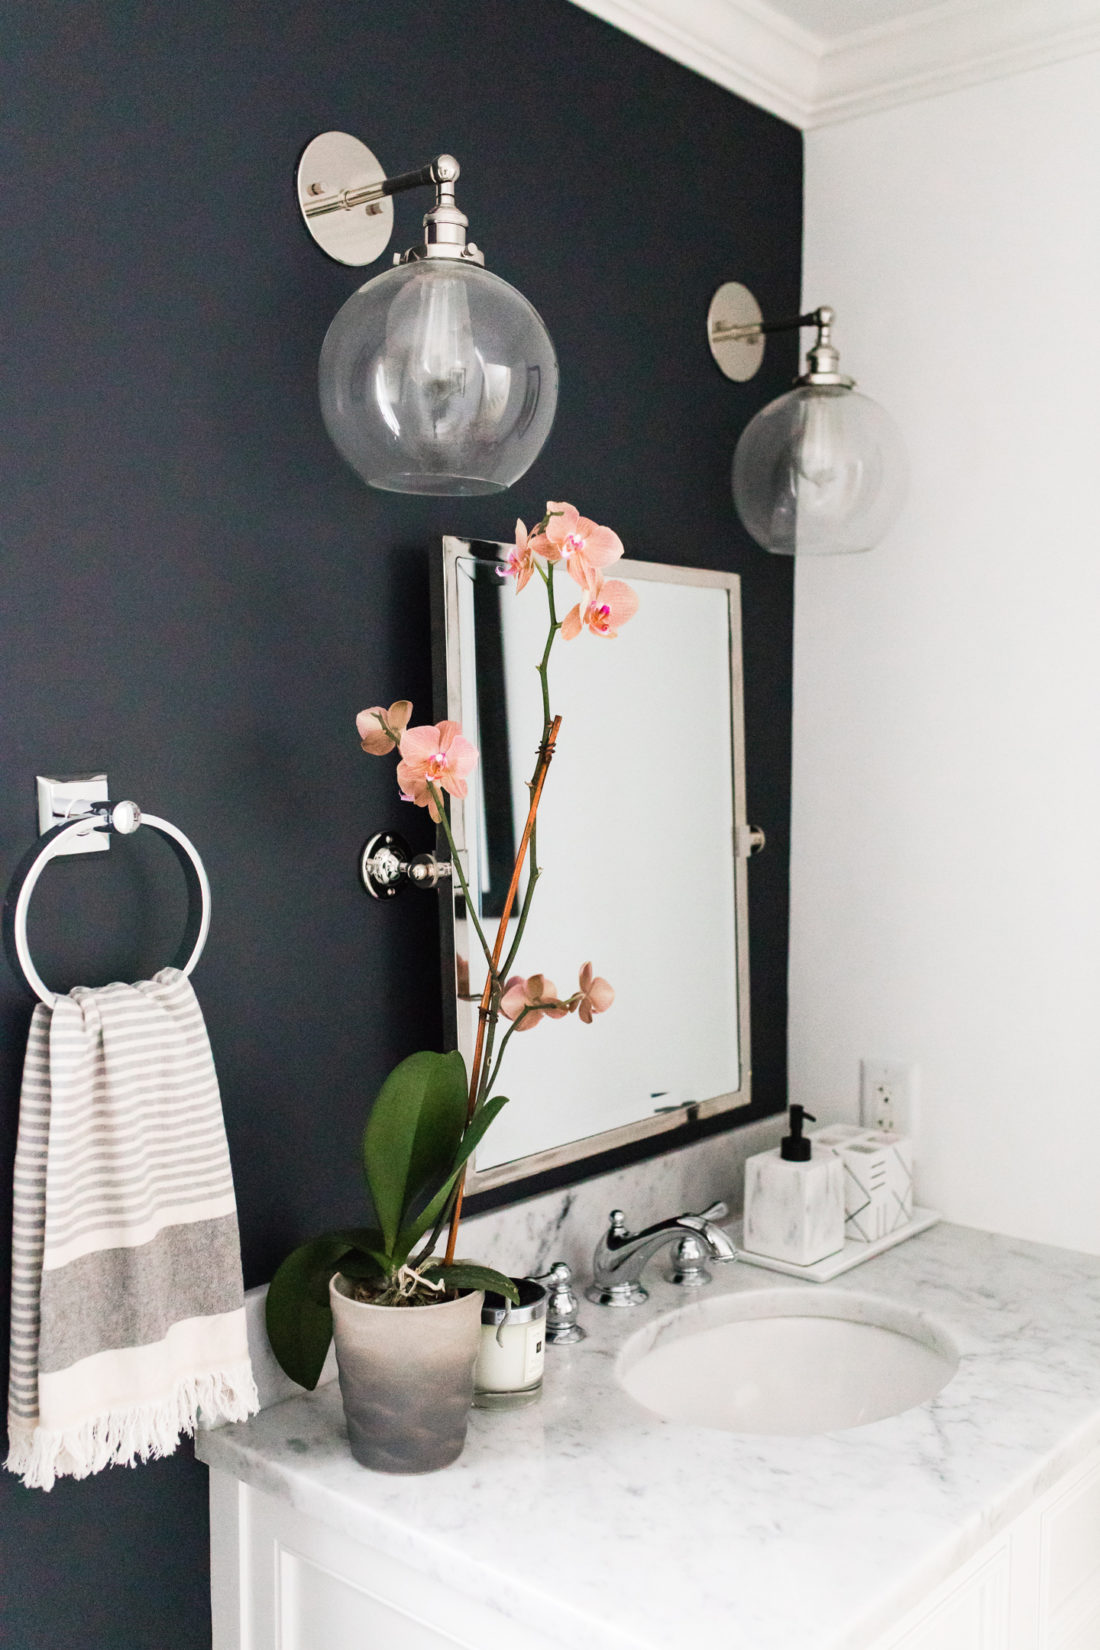 Eva Amurri Martino shares the full redesign of her black, white, and grey concept powder room in her Connecticut home